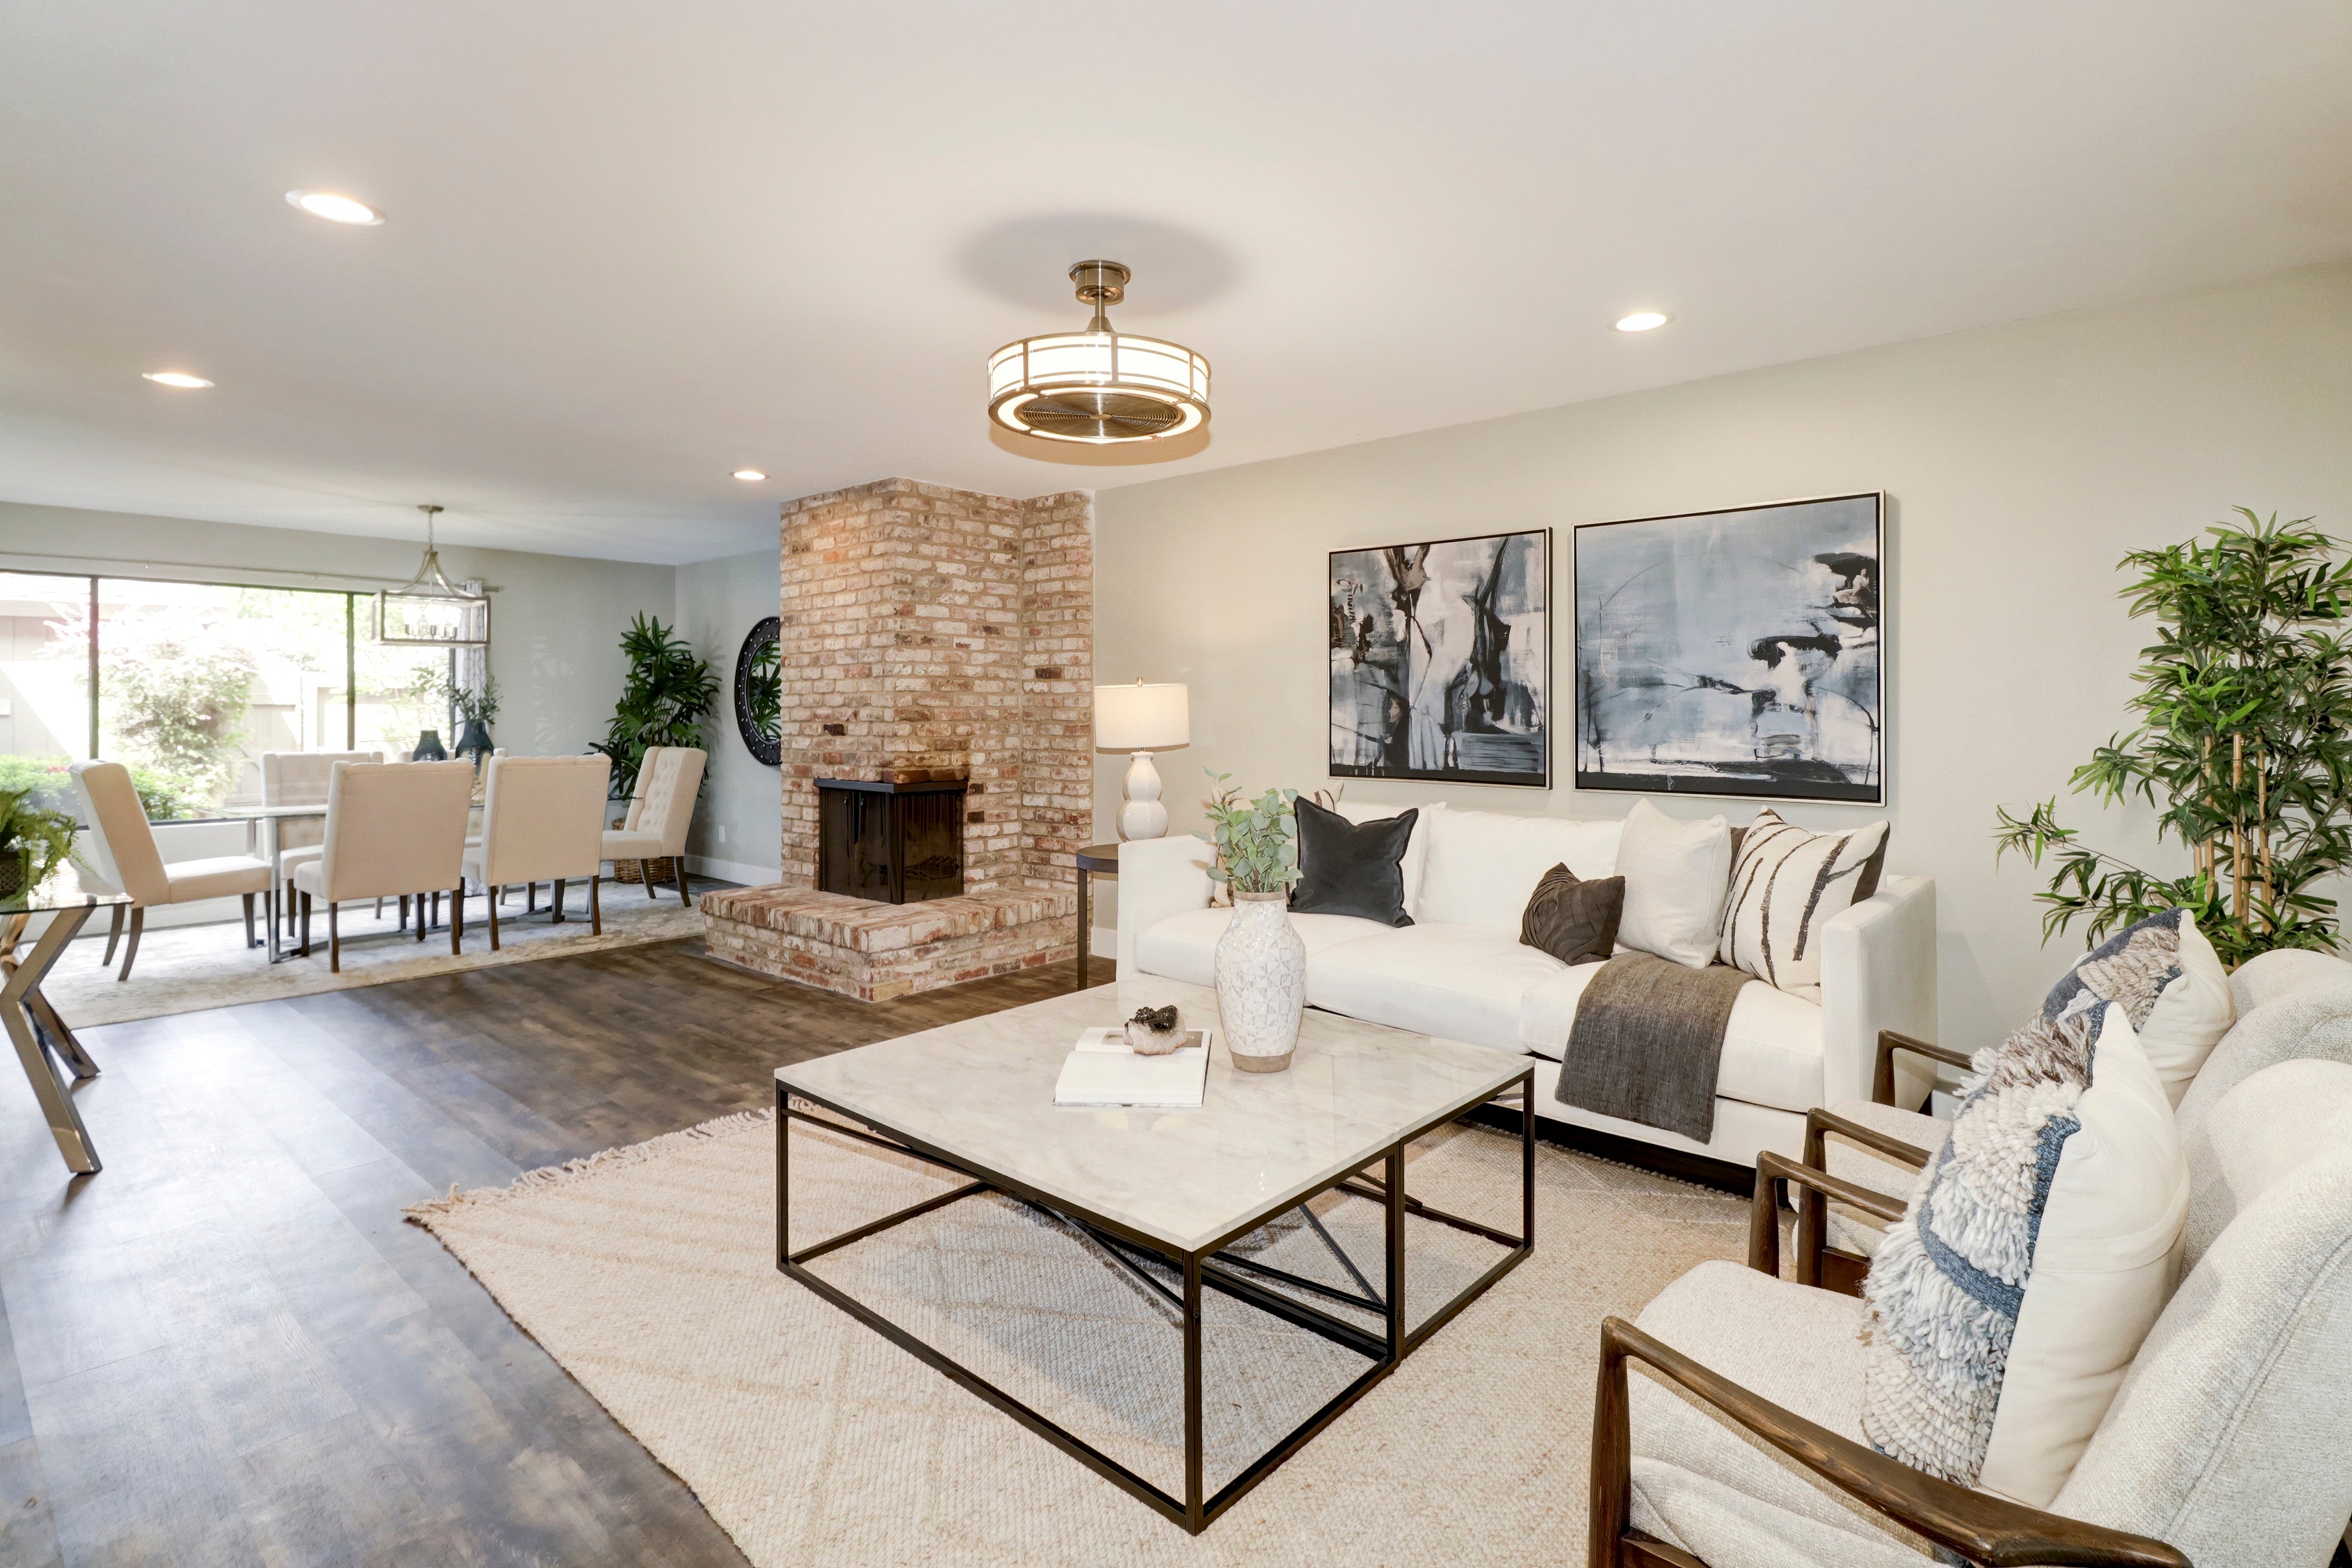 Premiere Home Staging Projects | Living room interior design idea - Swarthmore Dr, Sacramento